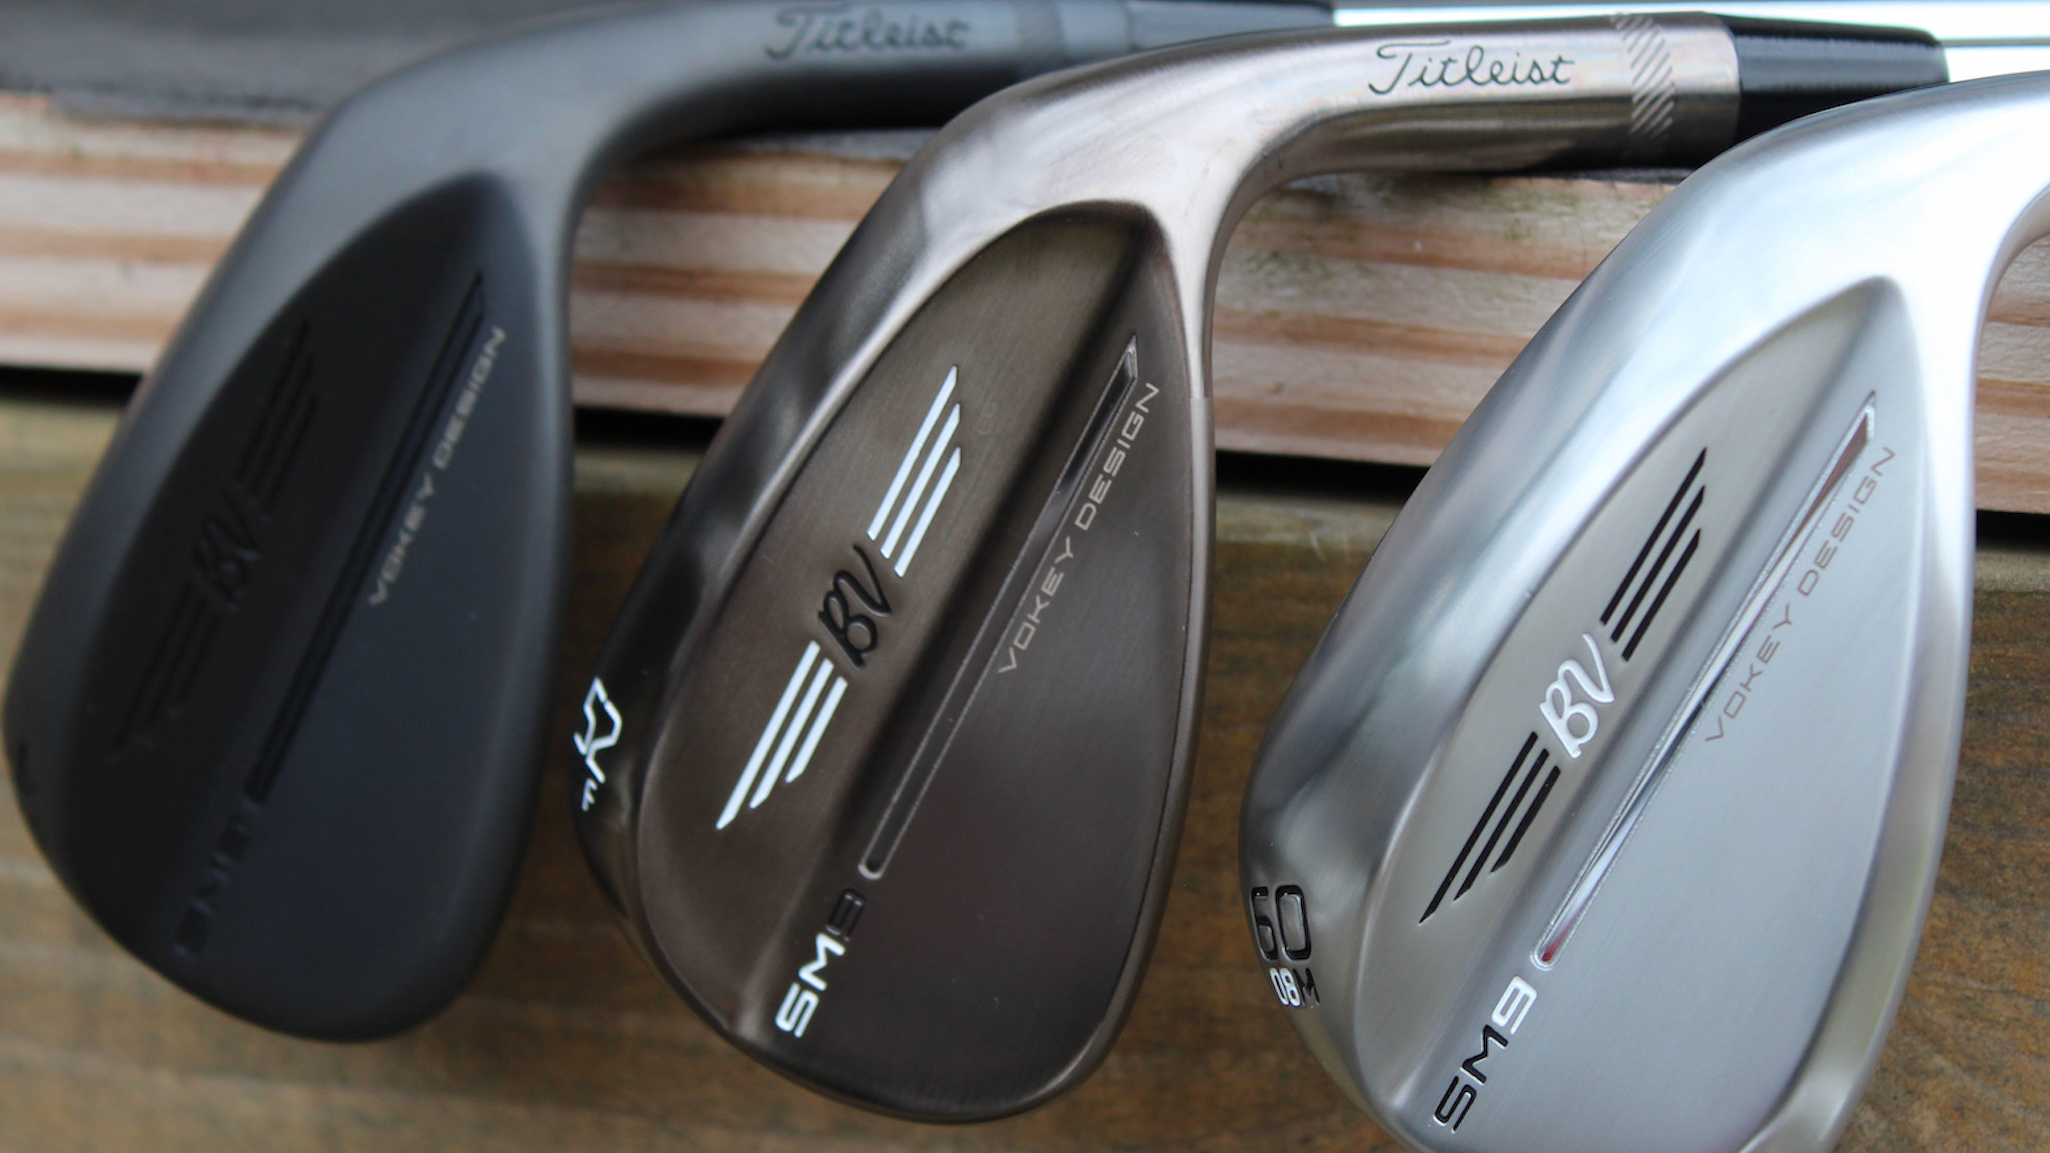 The SM9 wedge is the newest offering from Titleist Vokey Design.